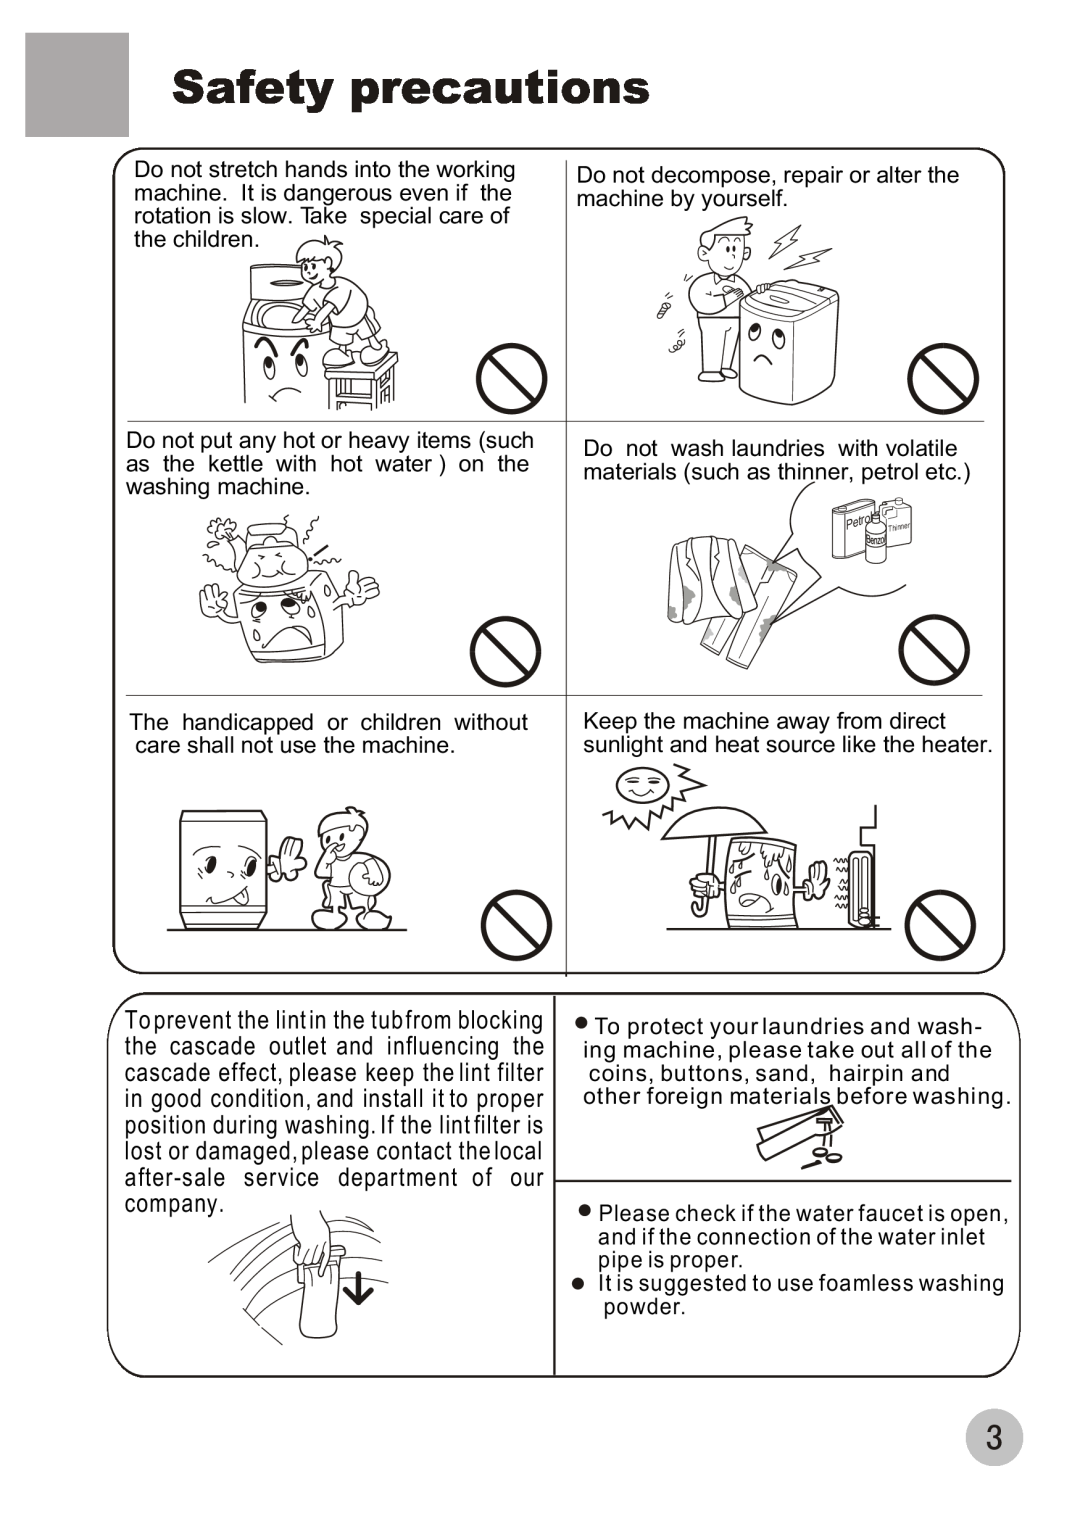 Haier HWM80-68B user manual Safety precautions, Do not decompose, repair or alter the machine by yourself 